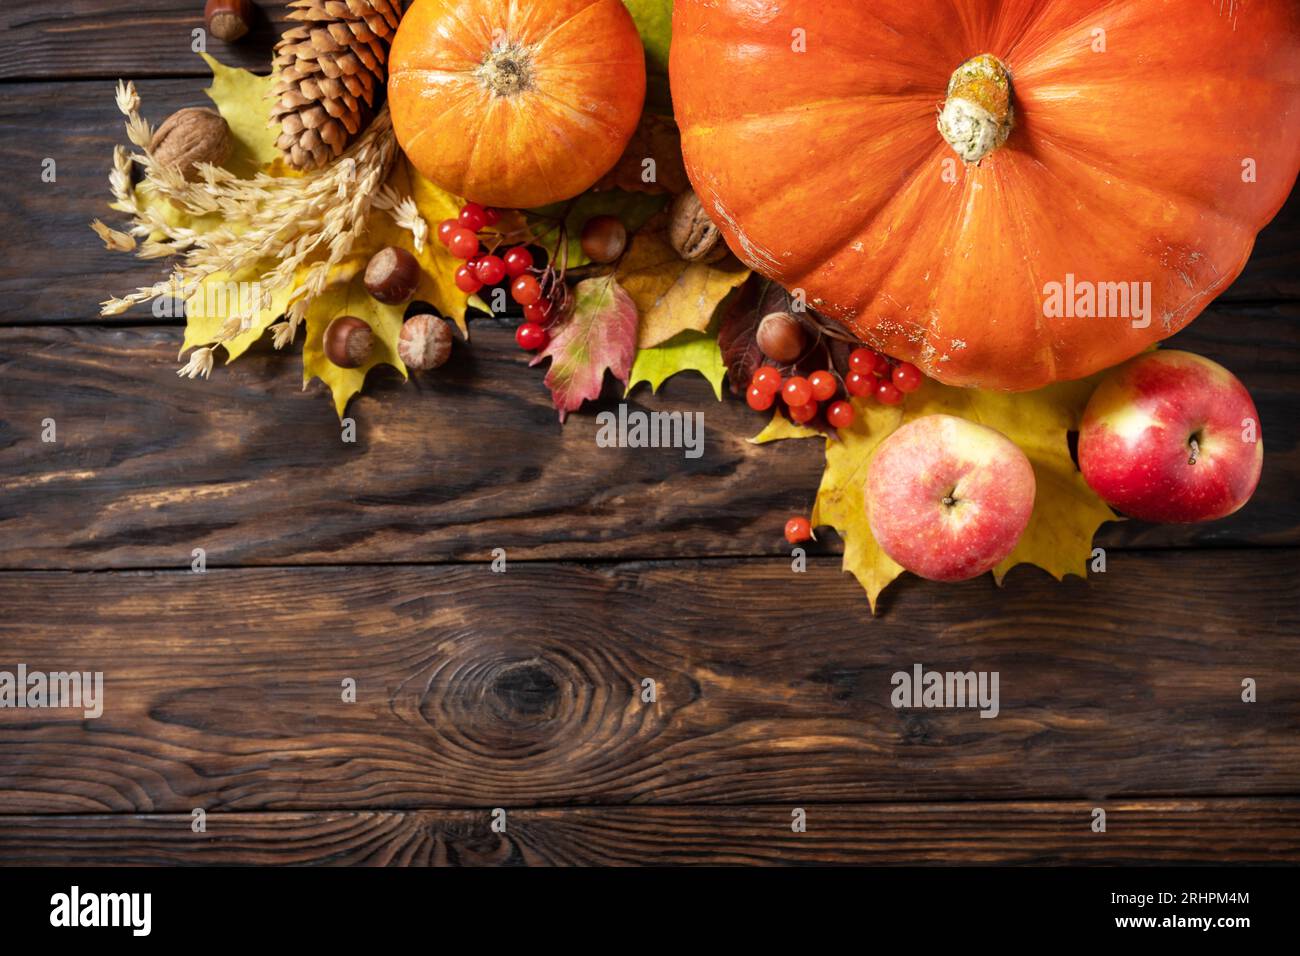 Autumn Day Thanksgiving or Halloween background. Festive autumn decor from ripe pumpkins, berries and leaves on a wooden background. View from above. Stock Photo